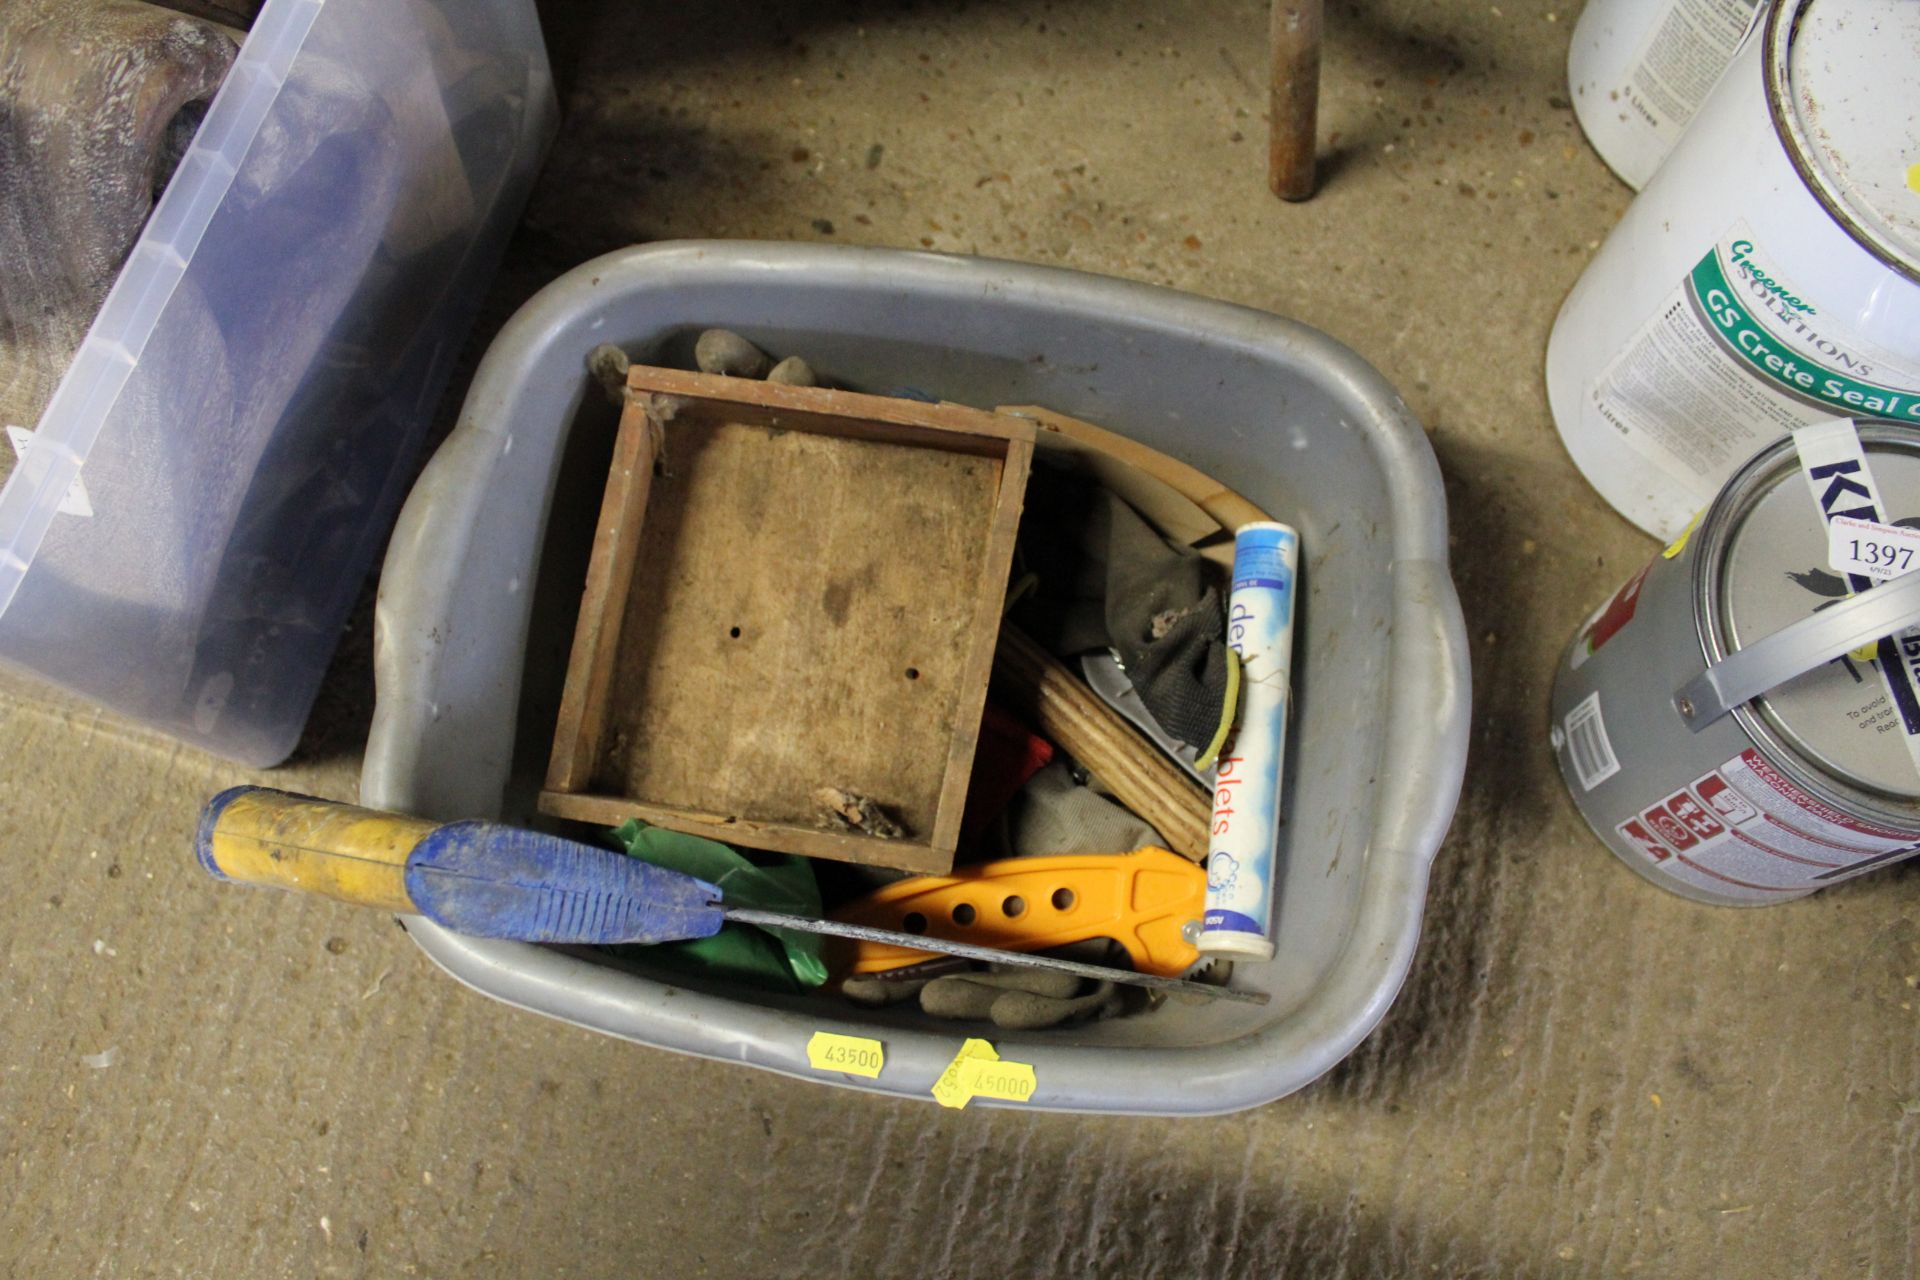 A plastic tool box and contents of fittings and a - Image 2 of 2